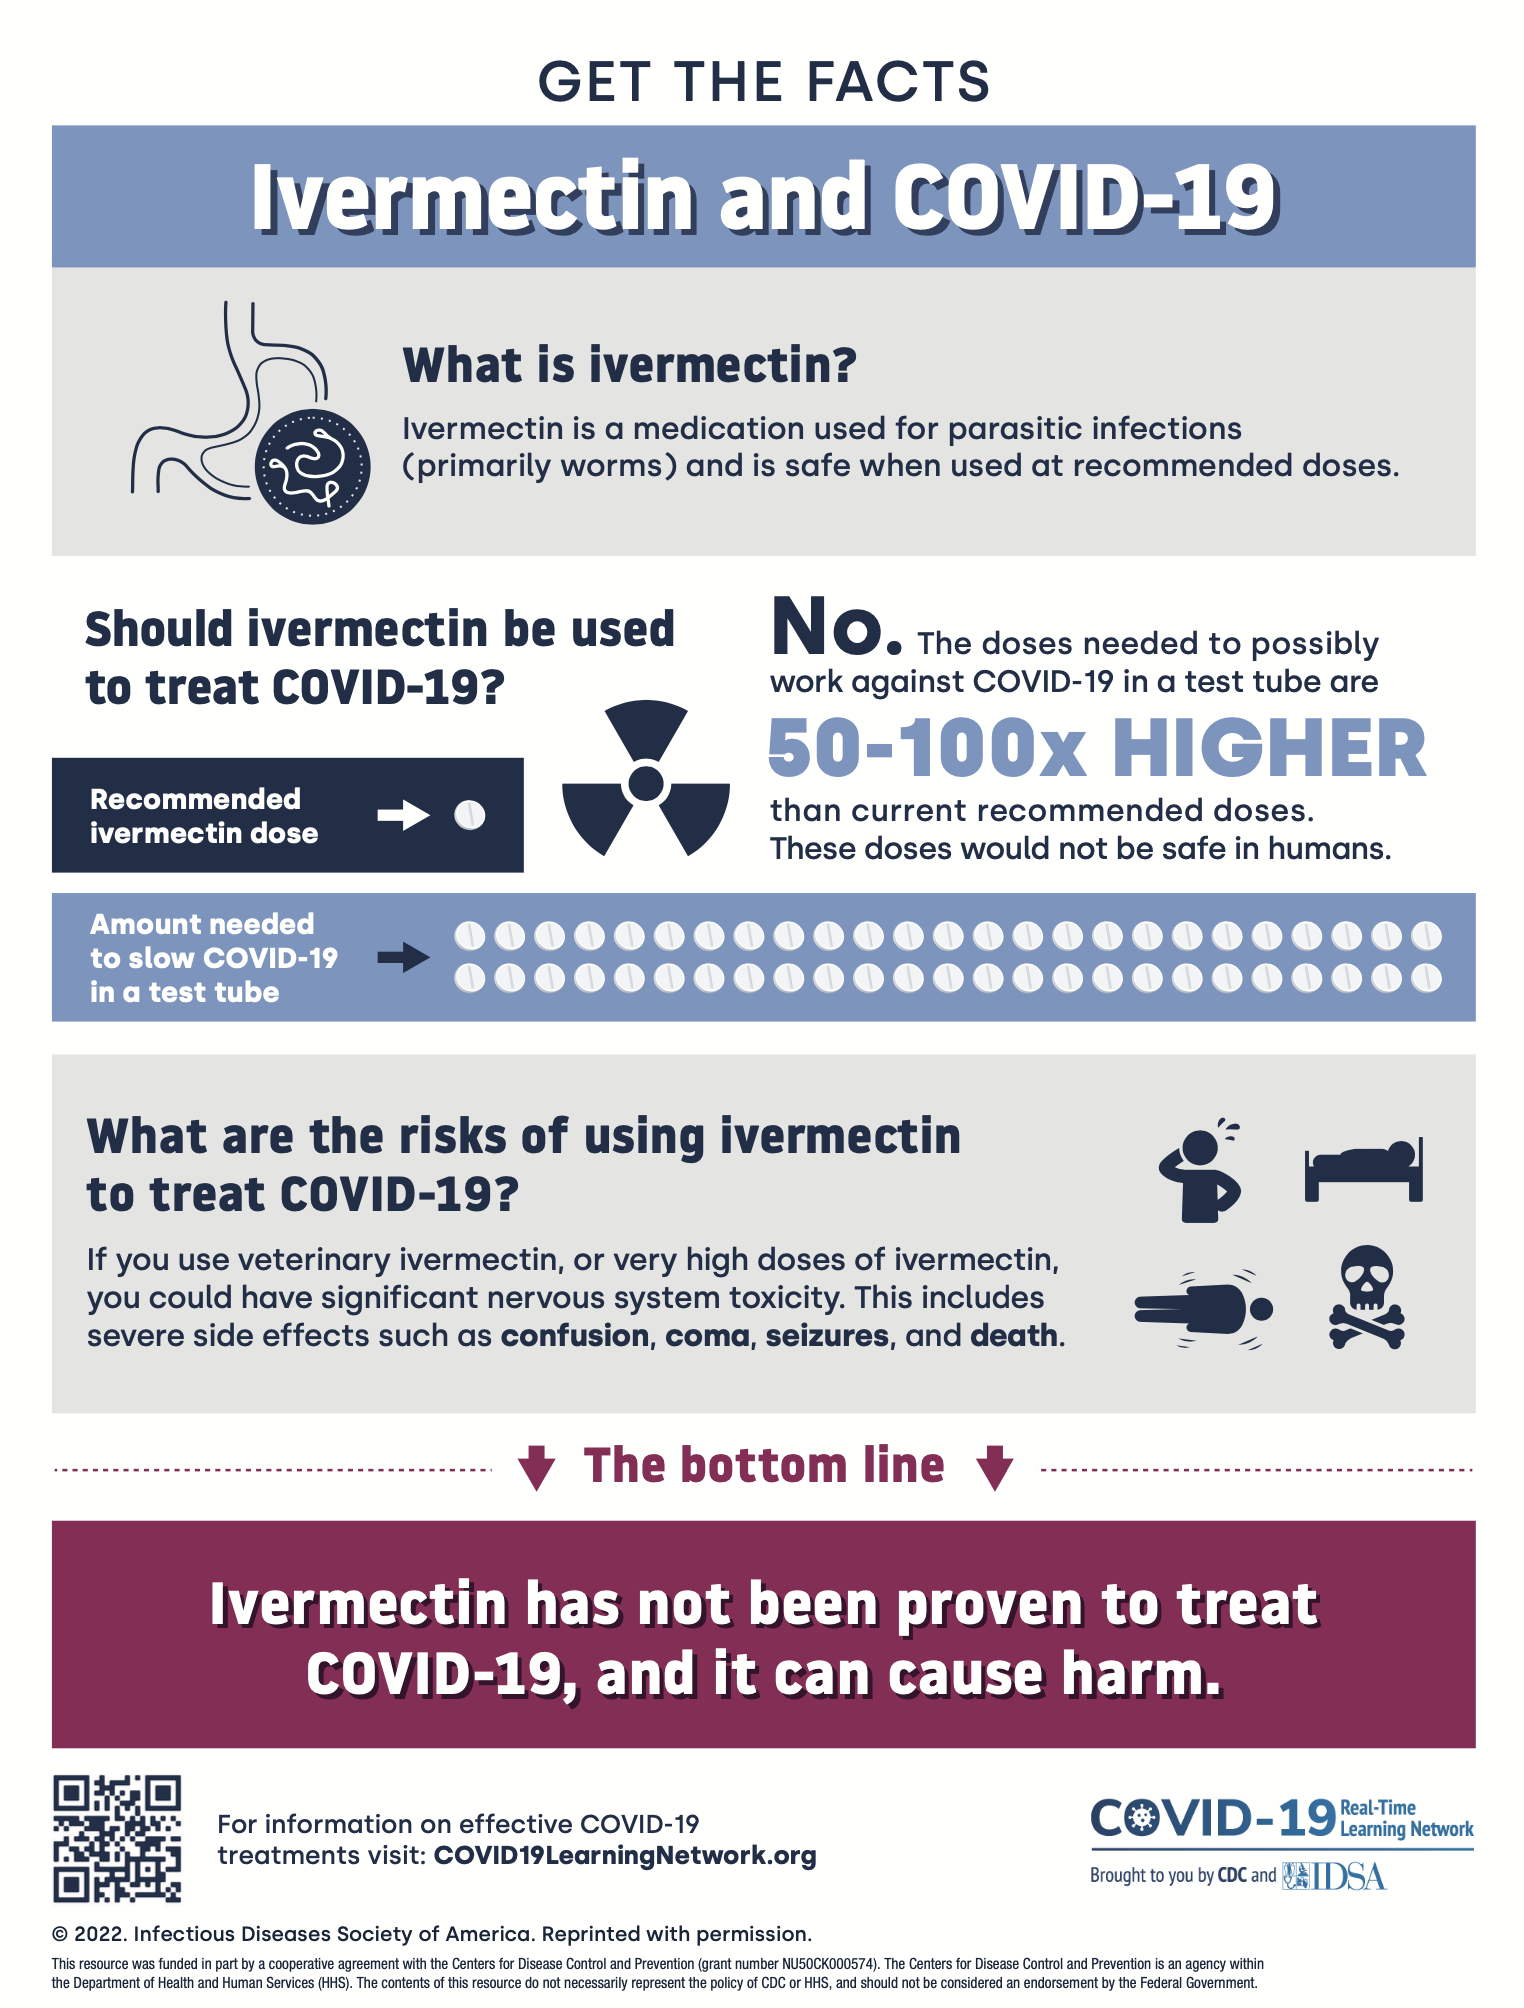 Ivermectin and COVID-19